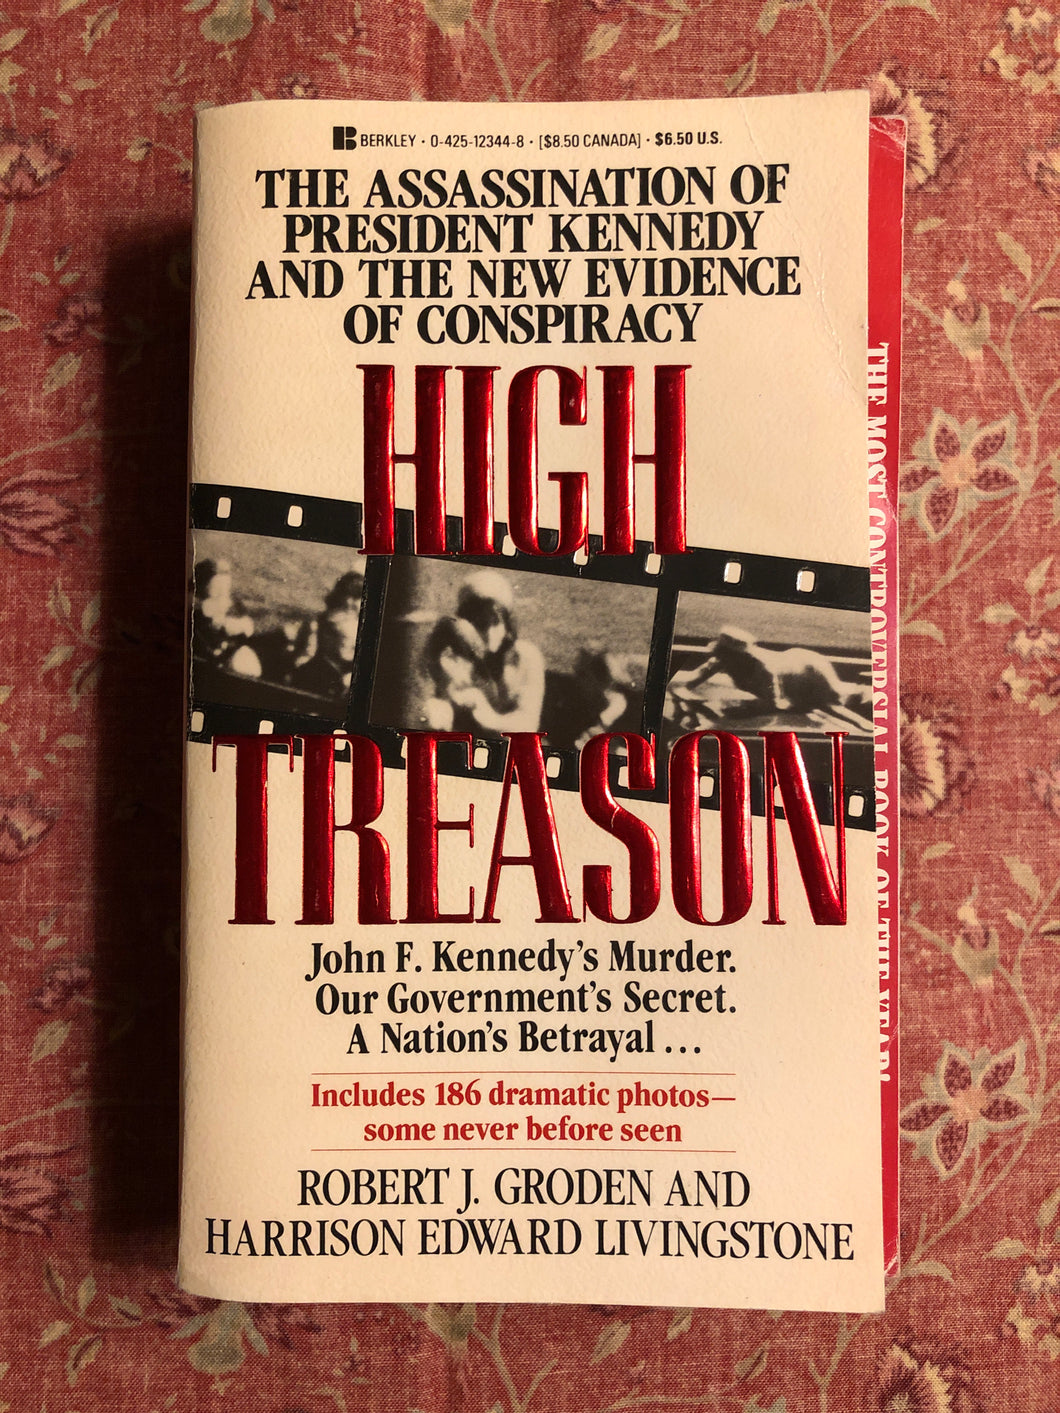 High Treason: The Assassination Of President Kennedy And The New Evidence Of Conspiracy